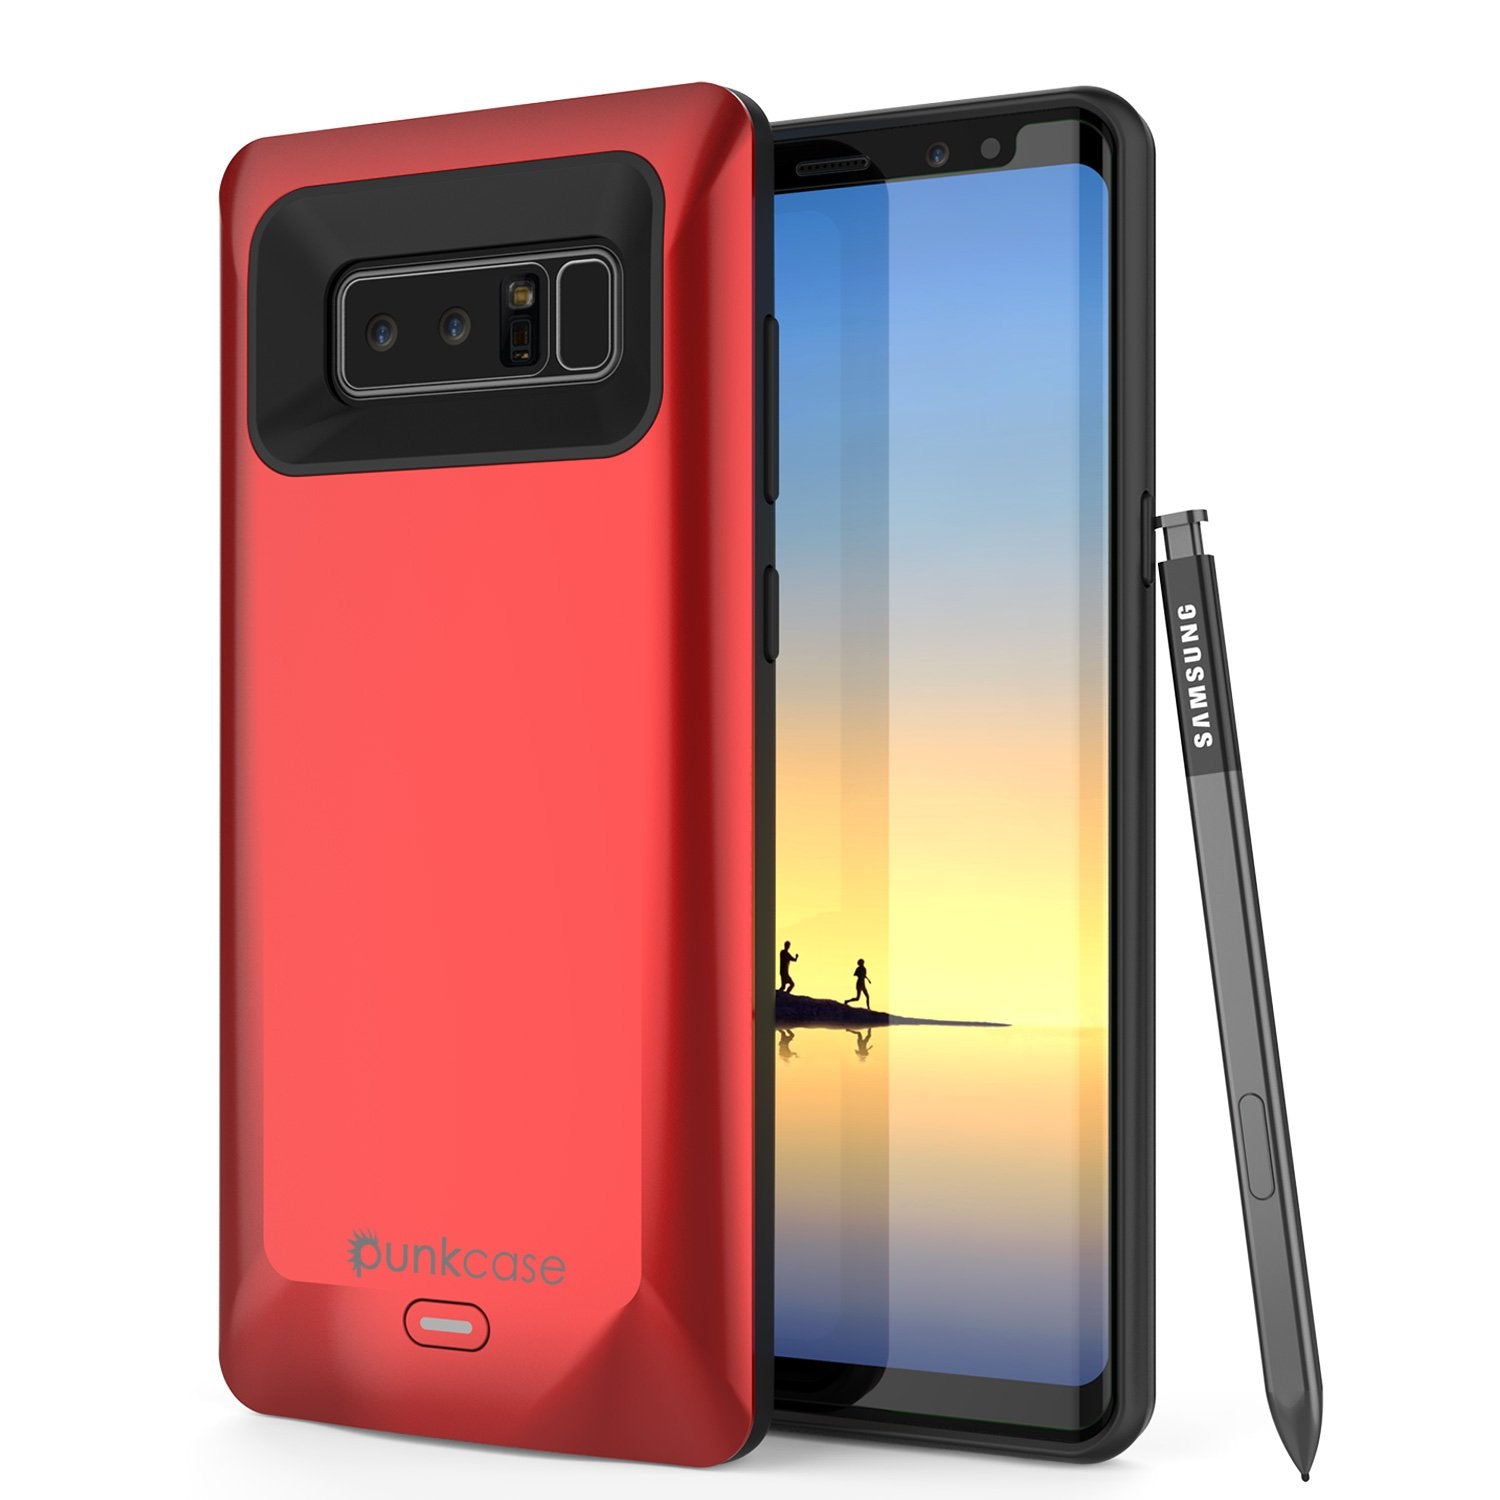 Galaxy Note 8 5000mAH Battery Charger Case W/ Screen Protector [Black]